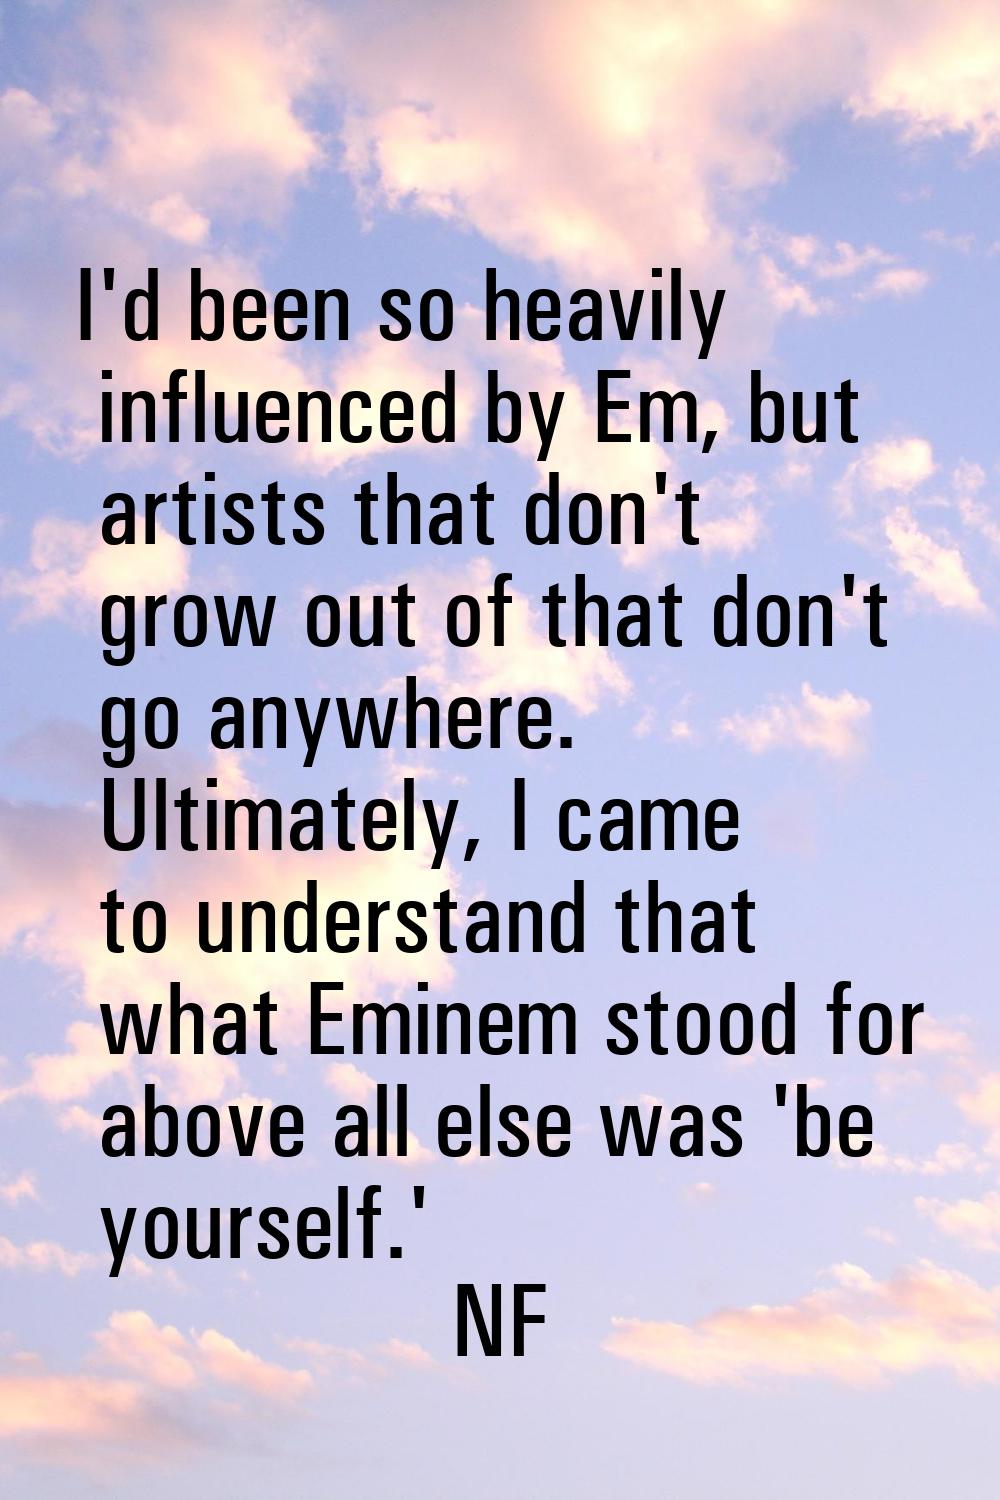 I'd been so heavily influenced by Em, but artists that don't grow out of that don't go anywhere. Ul